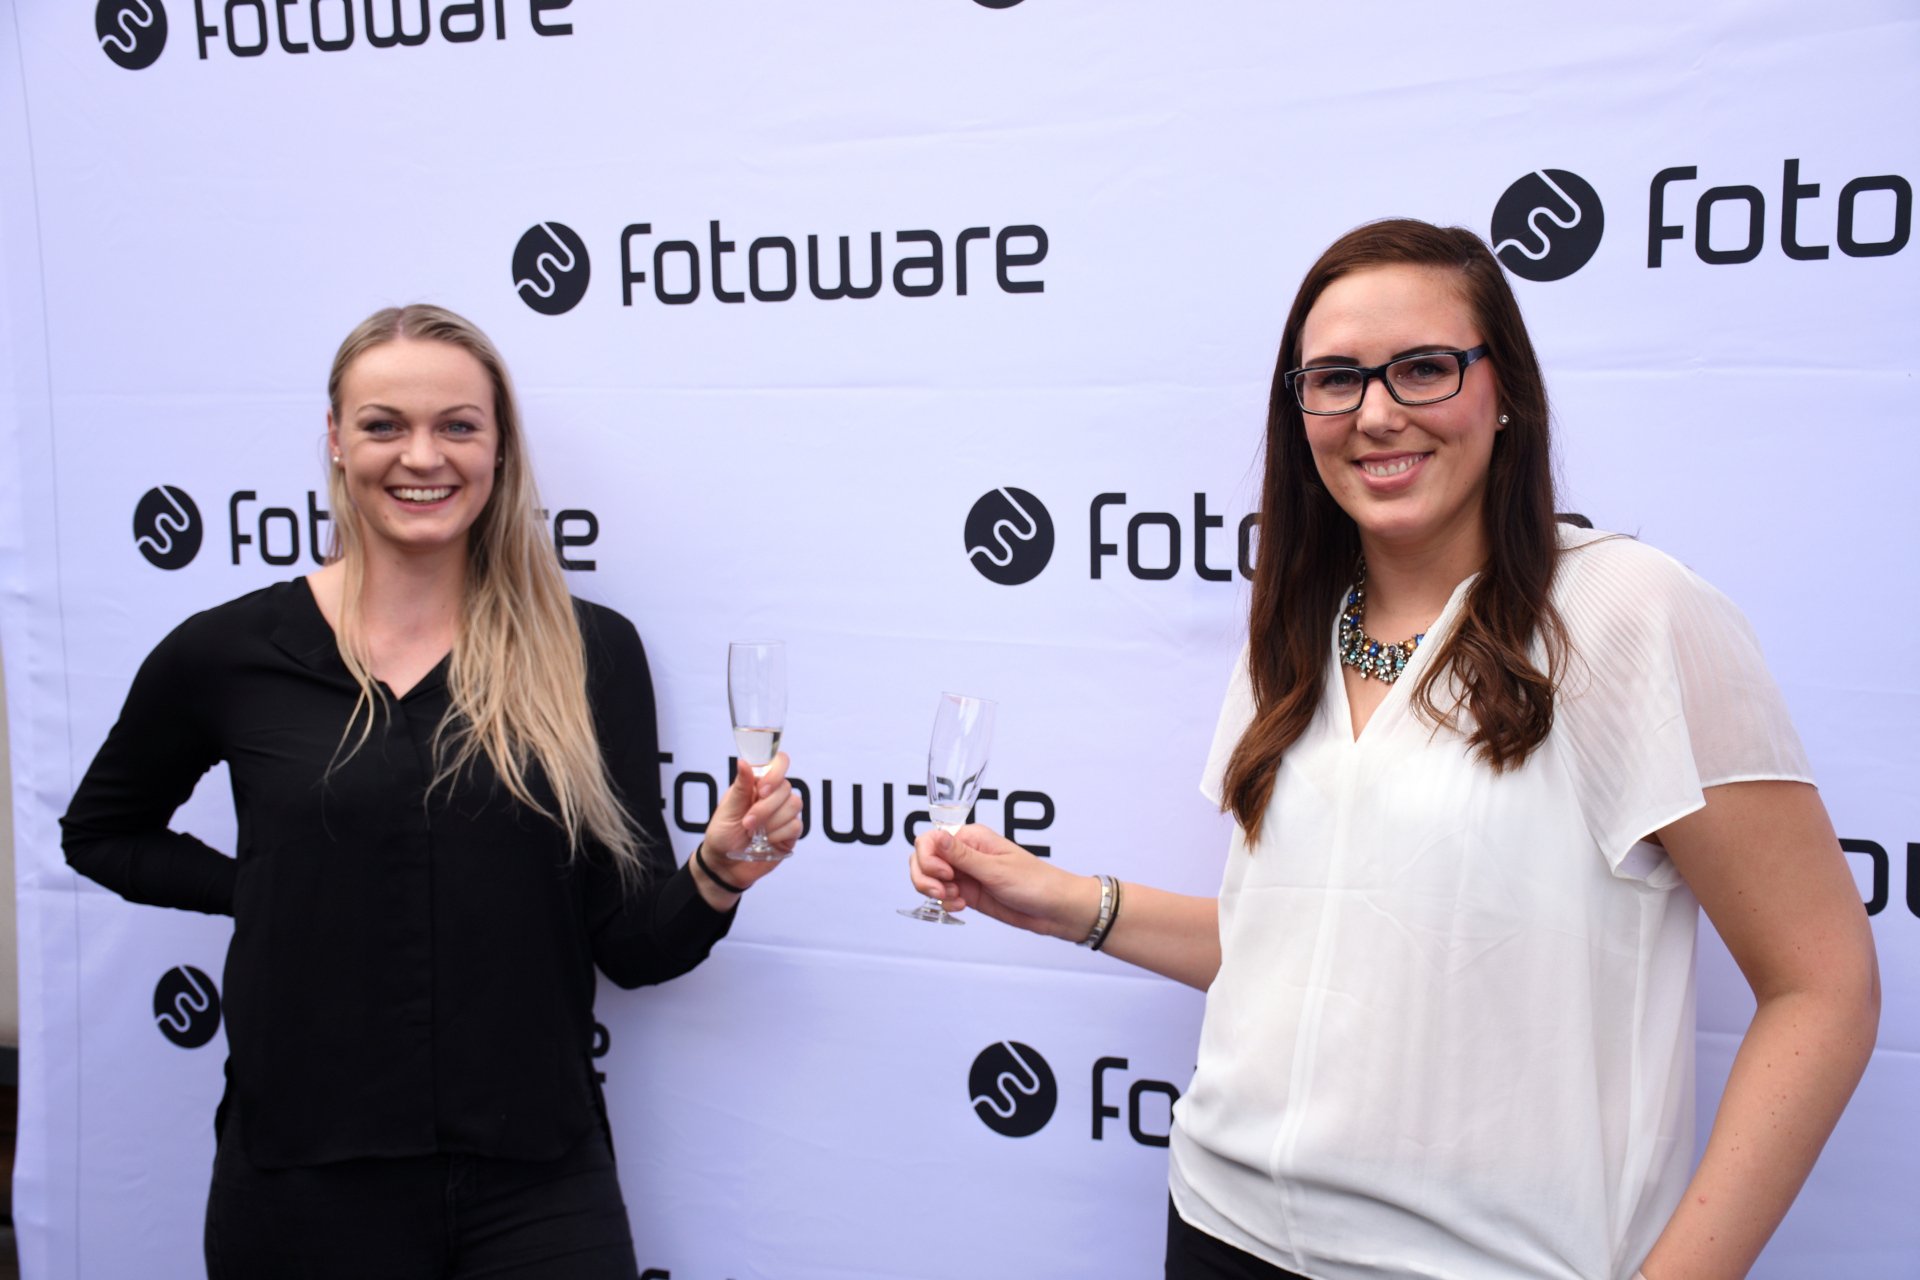 Two women smiling and holding glasses in front of a FotoWare logo wall